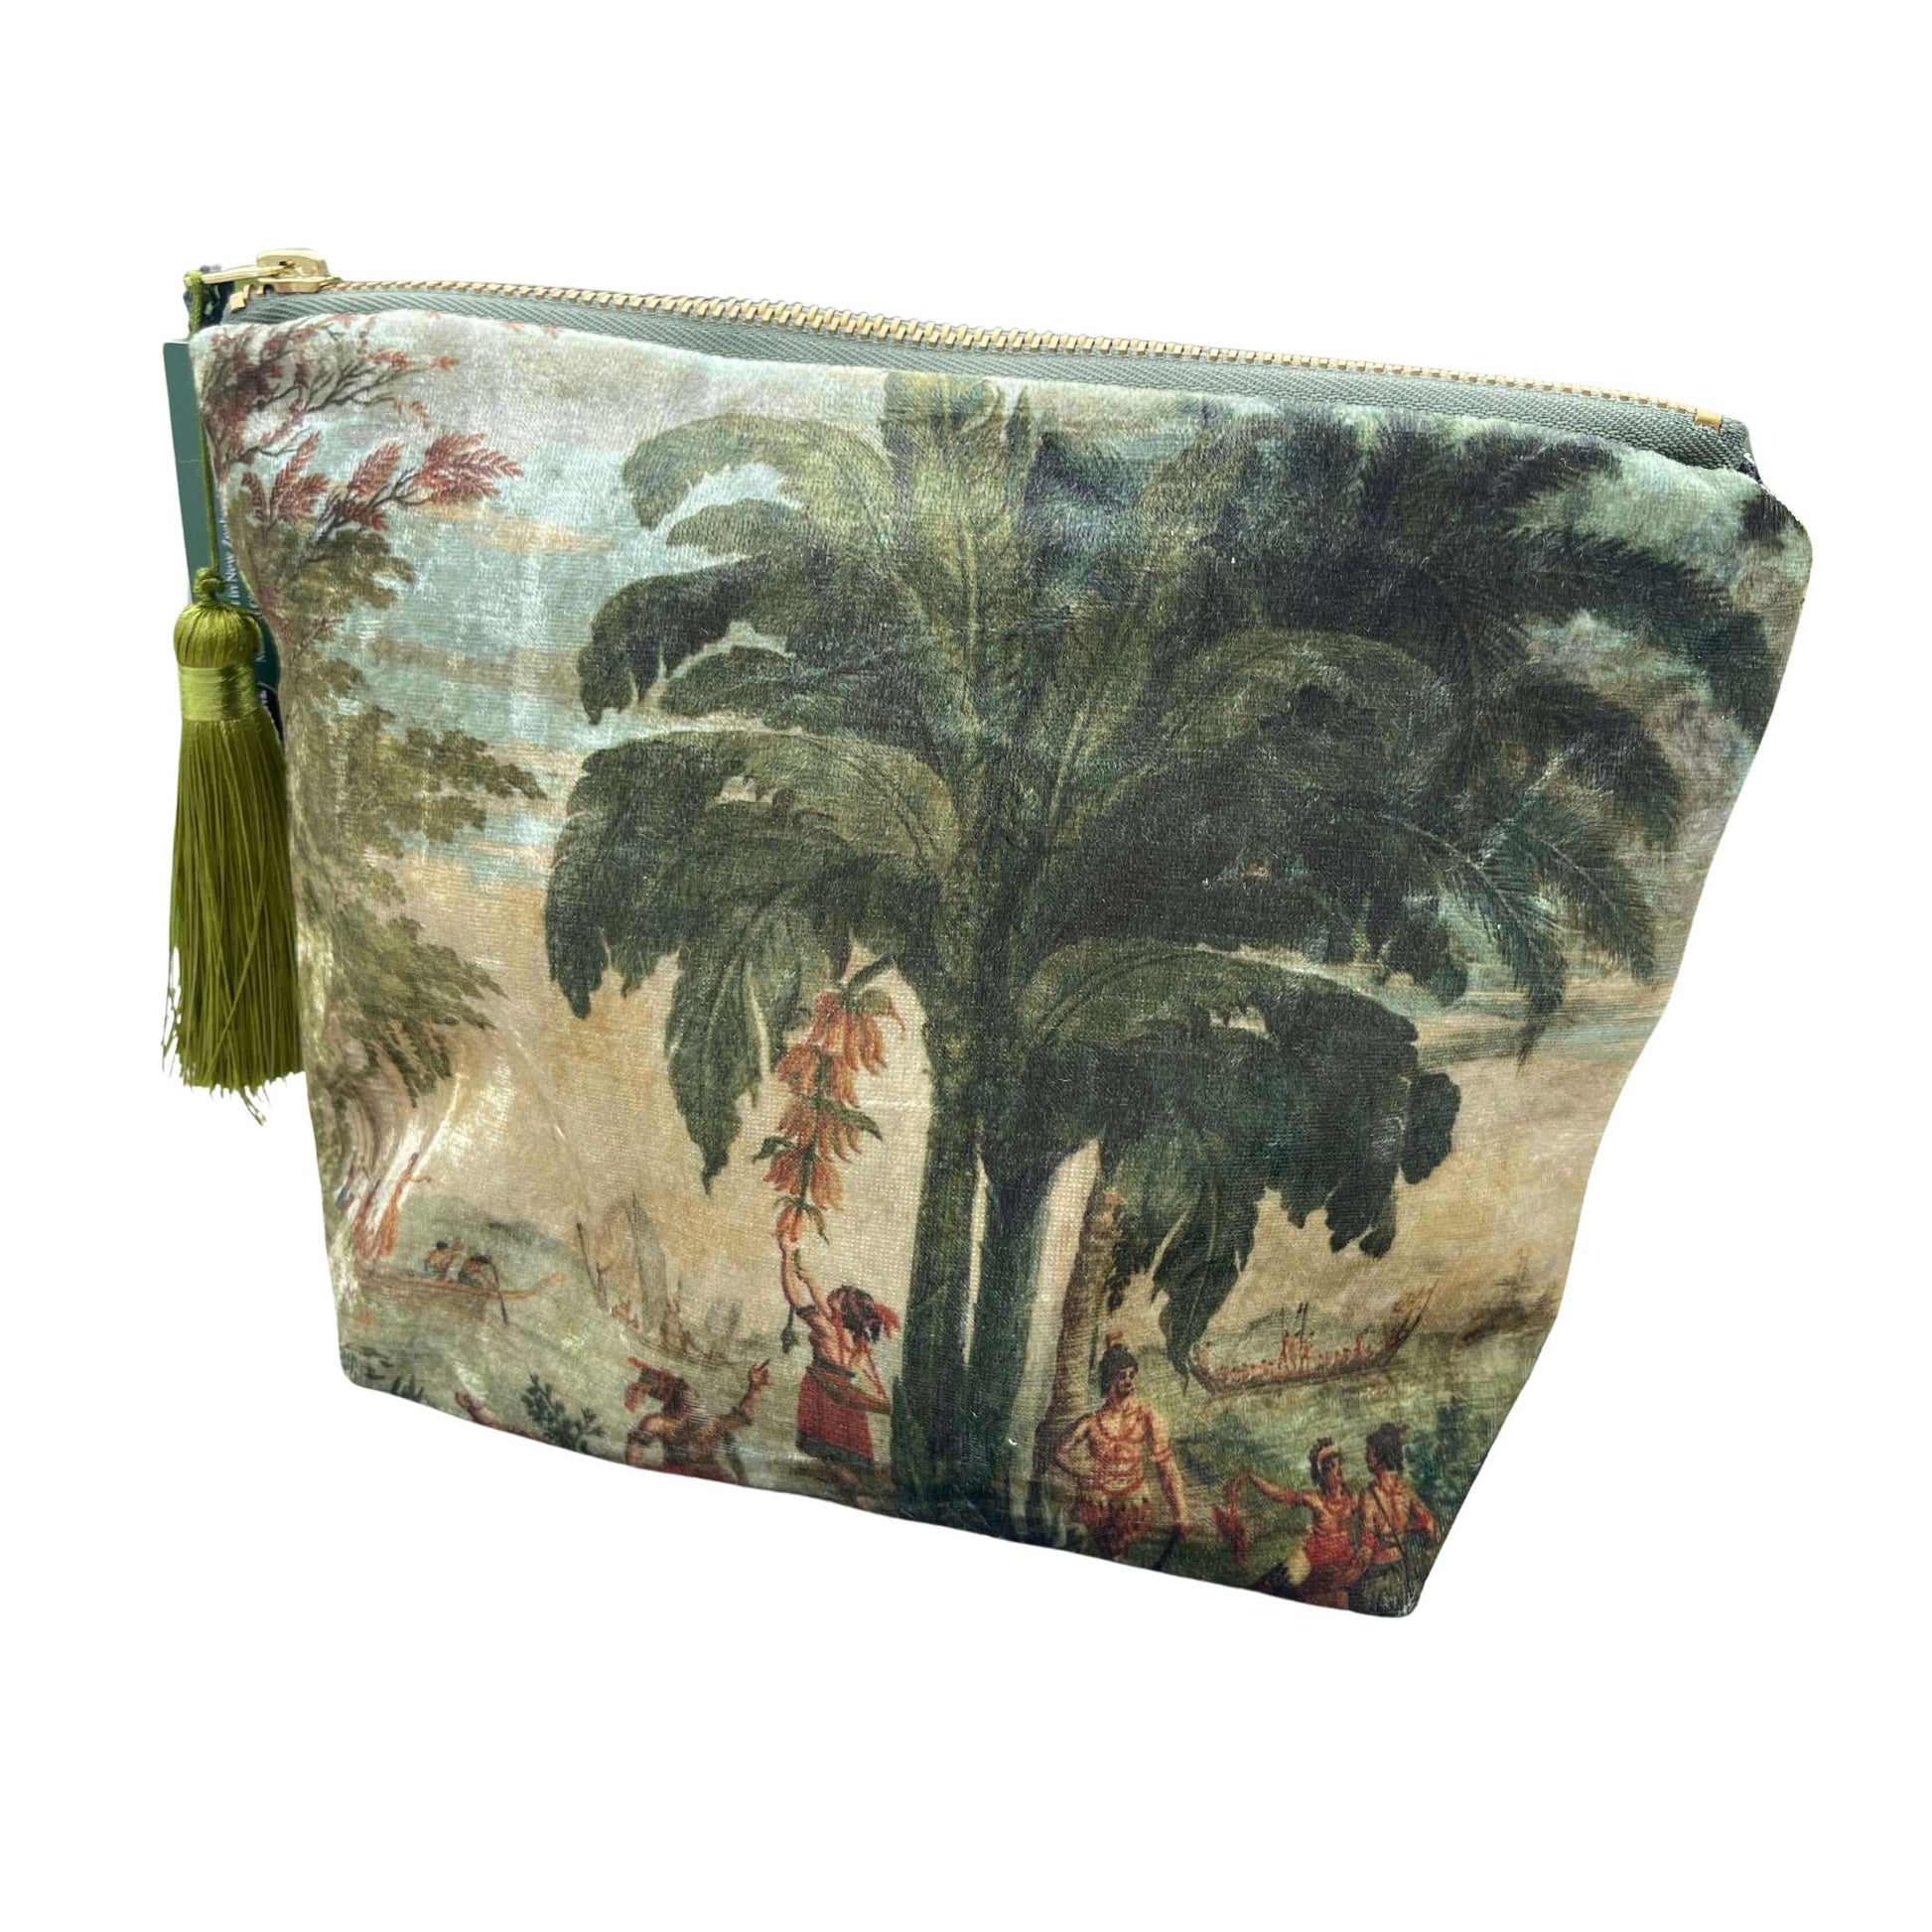 Velvet cosmetic bag featuring a scene from a Joseph Dufour painting.